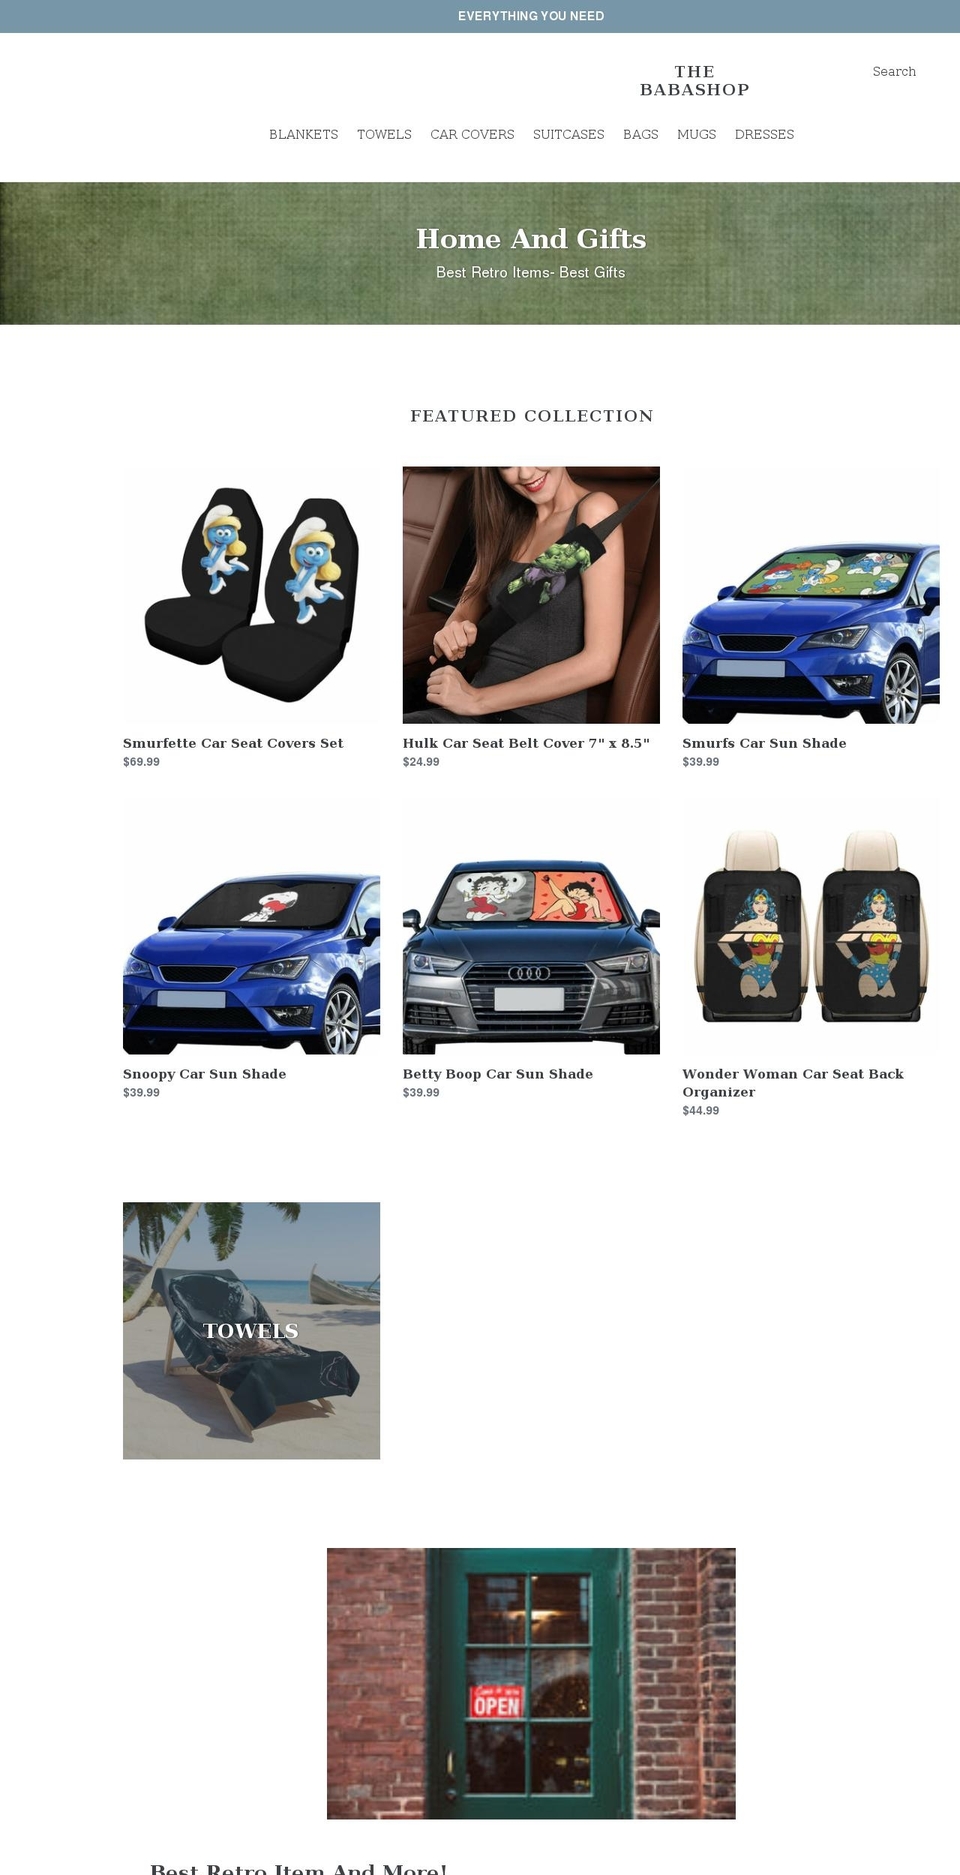 Gifts Shopify theme site example thebabashop.com